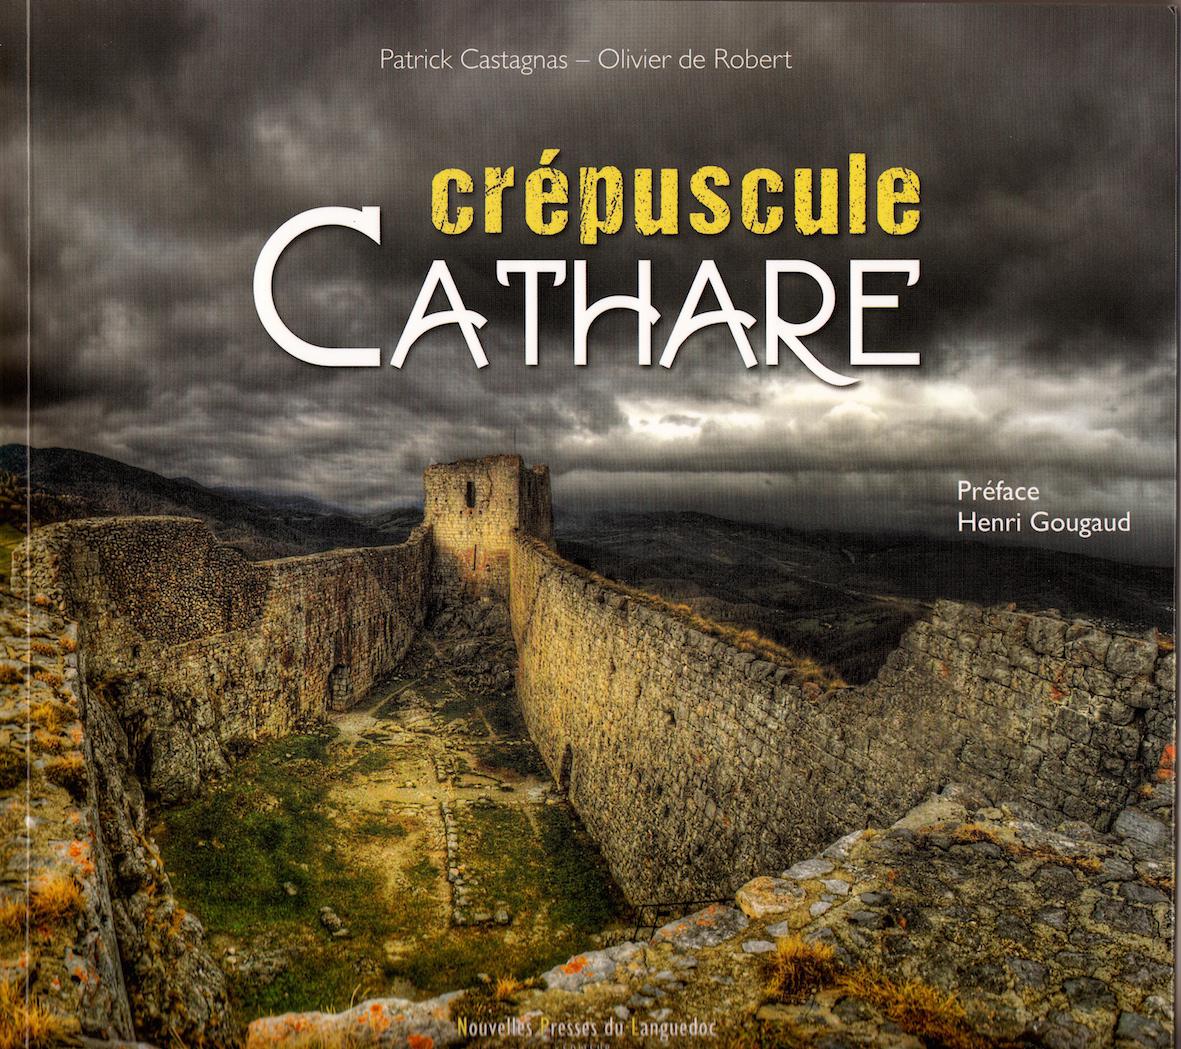 image Crépuscule cathare